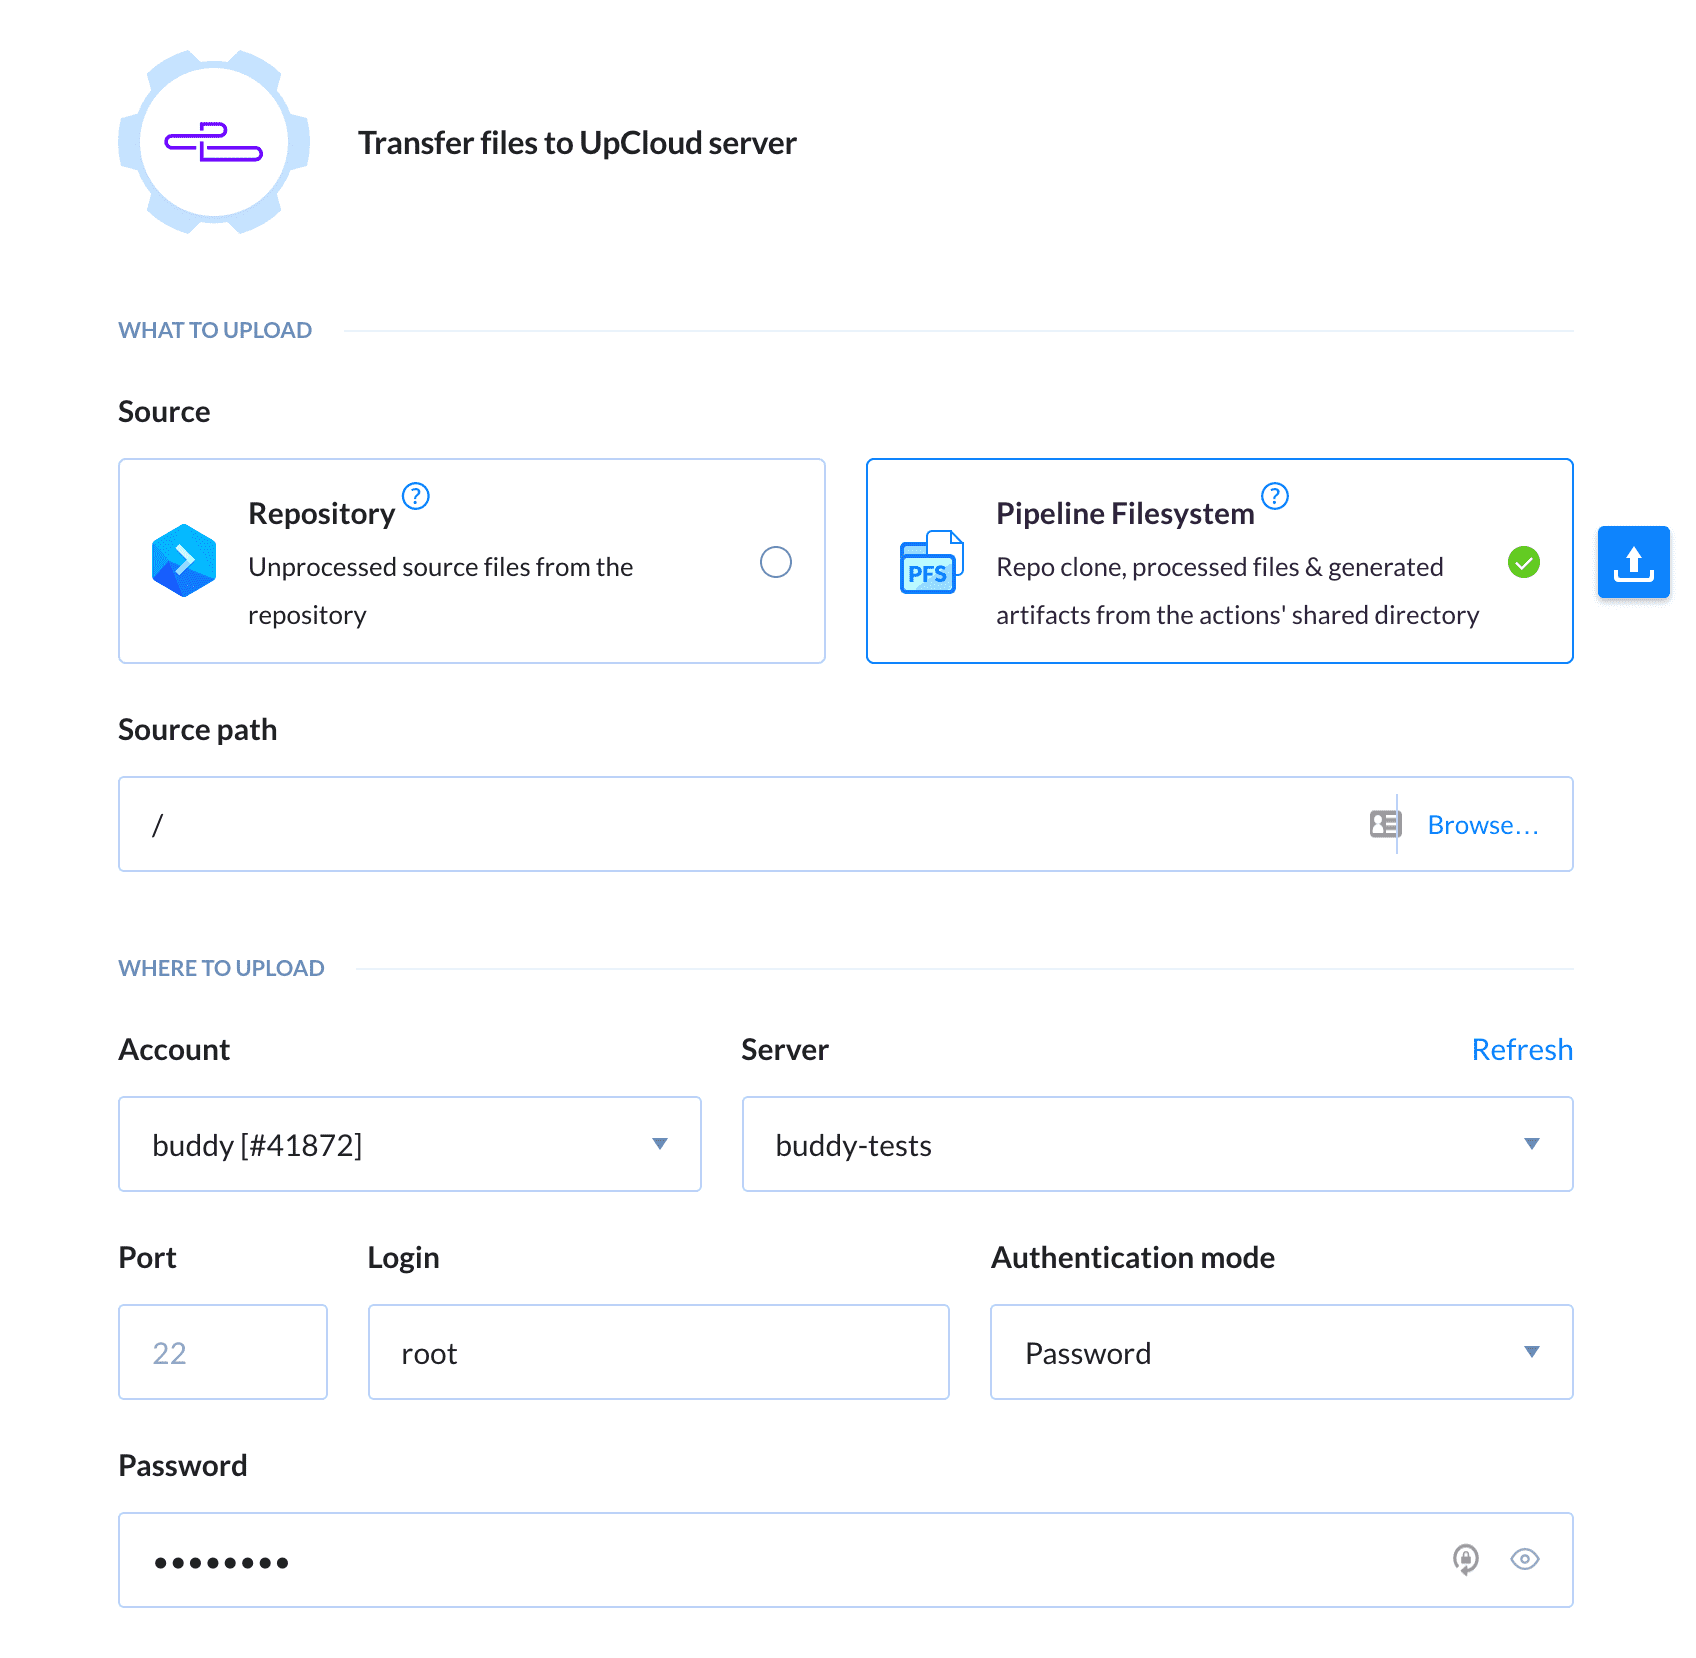 UpCloud action details